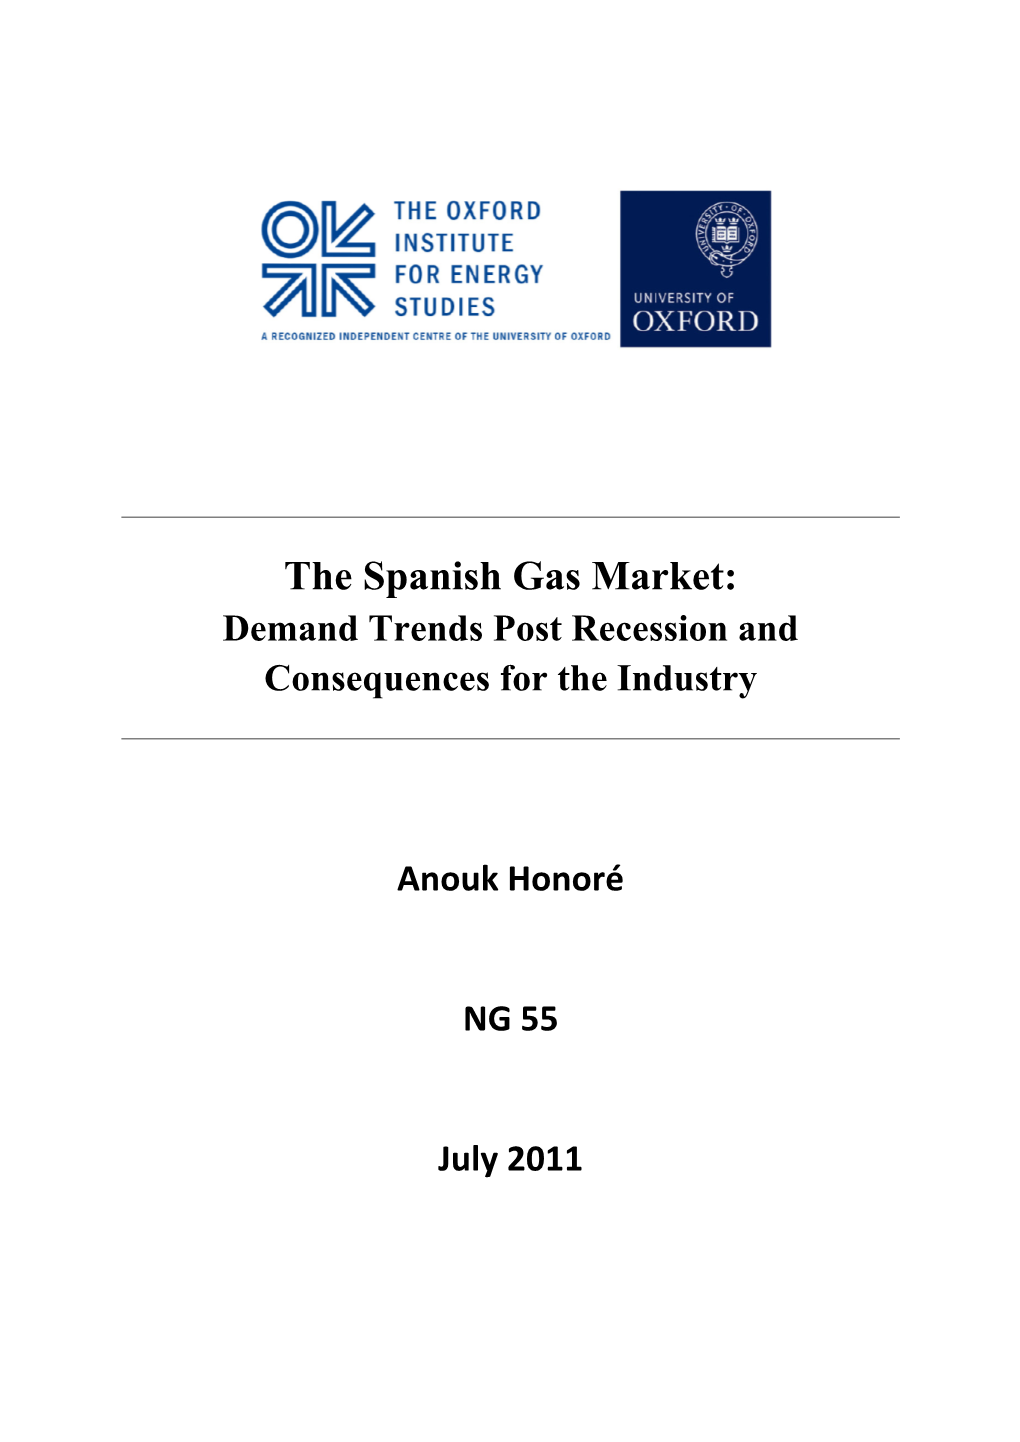 The Spanish Gas Market: Demand Trends Post Recession and Consequences for the Industry